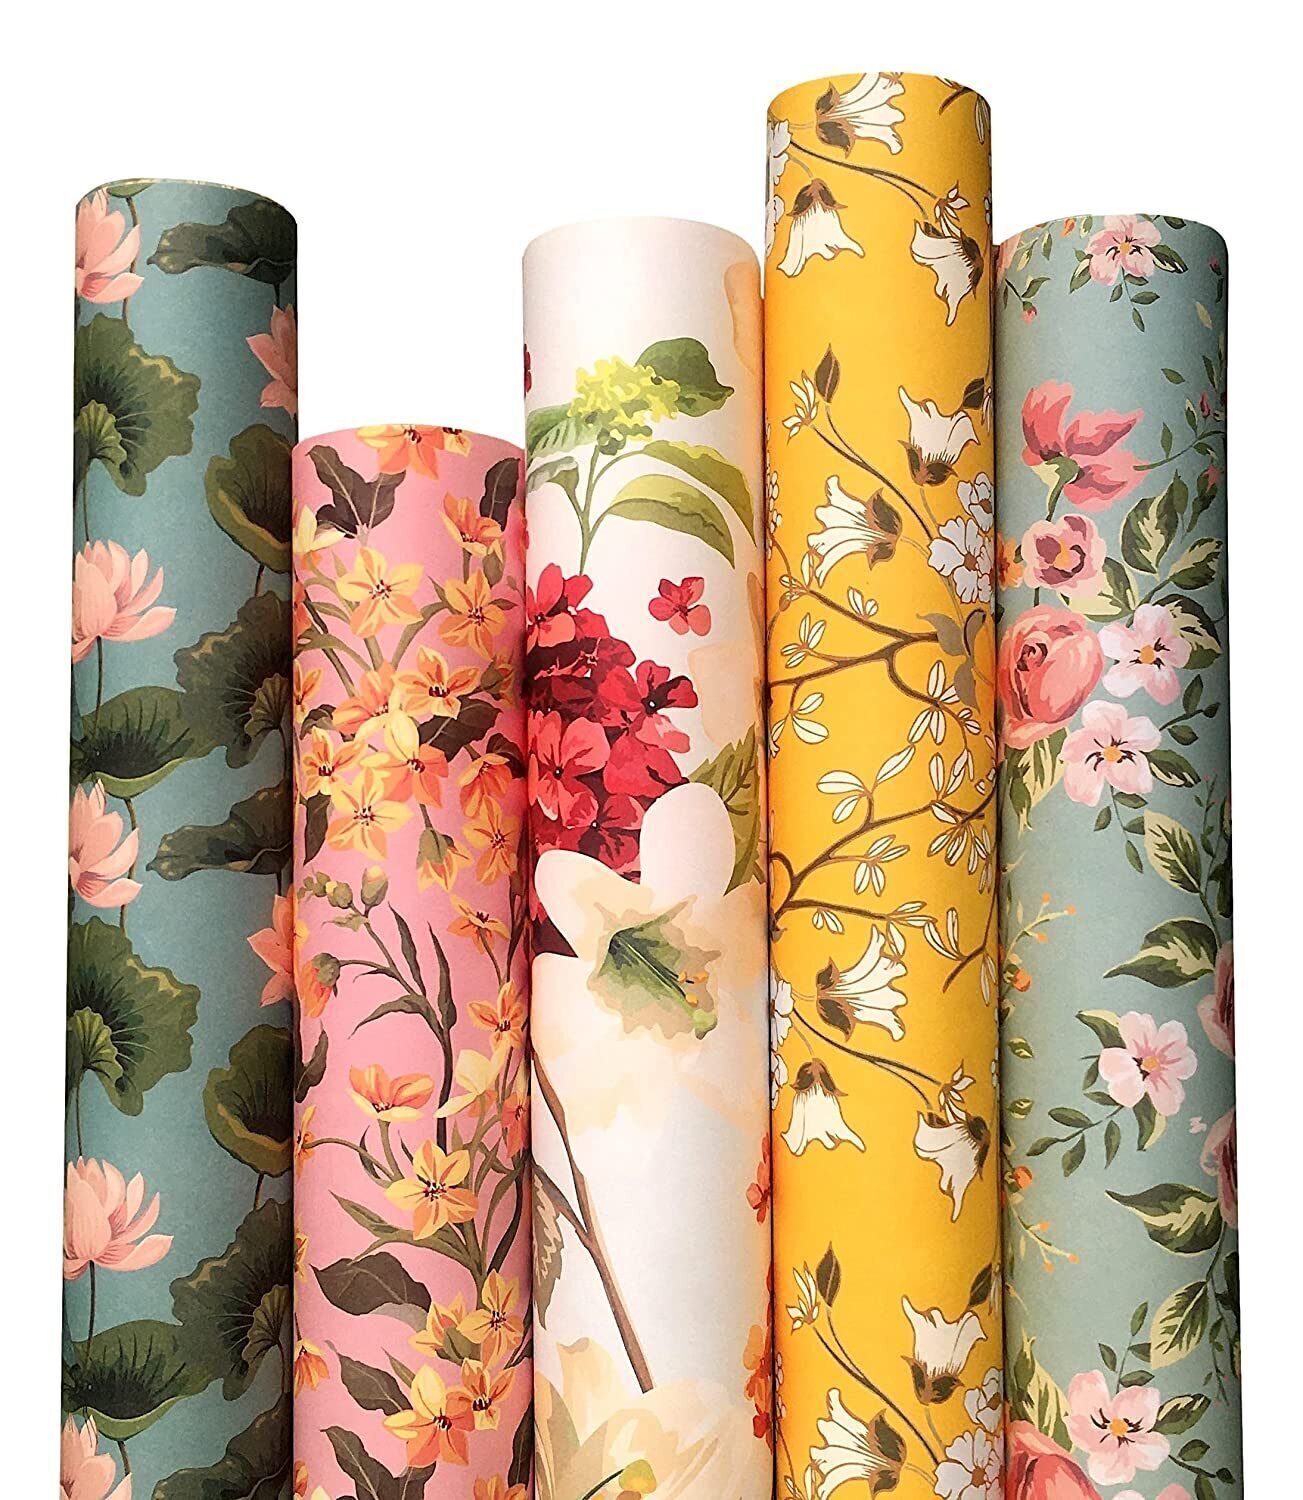 Floral Print Wrapping Paper Sheets Pack Of 5 Each 29 x 19 inches